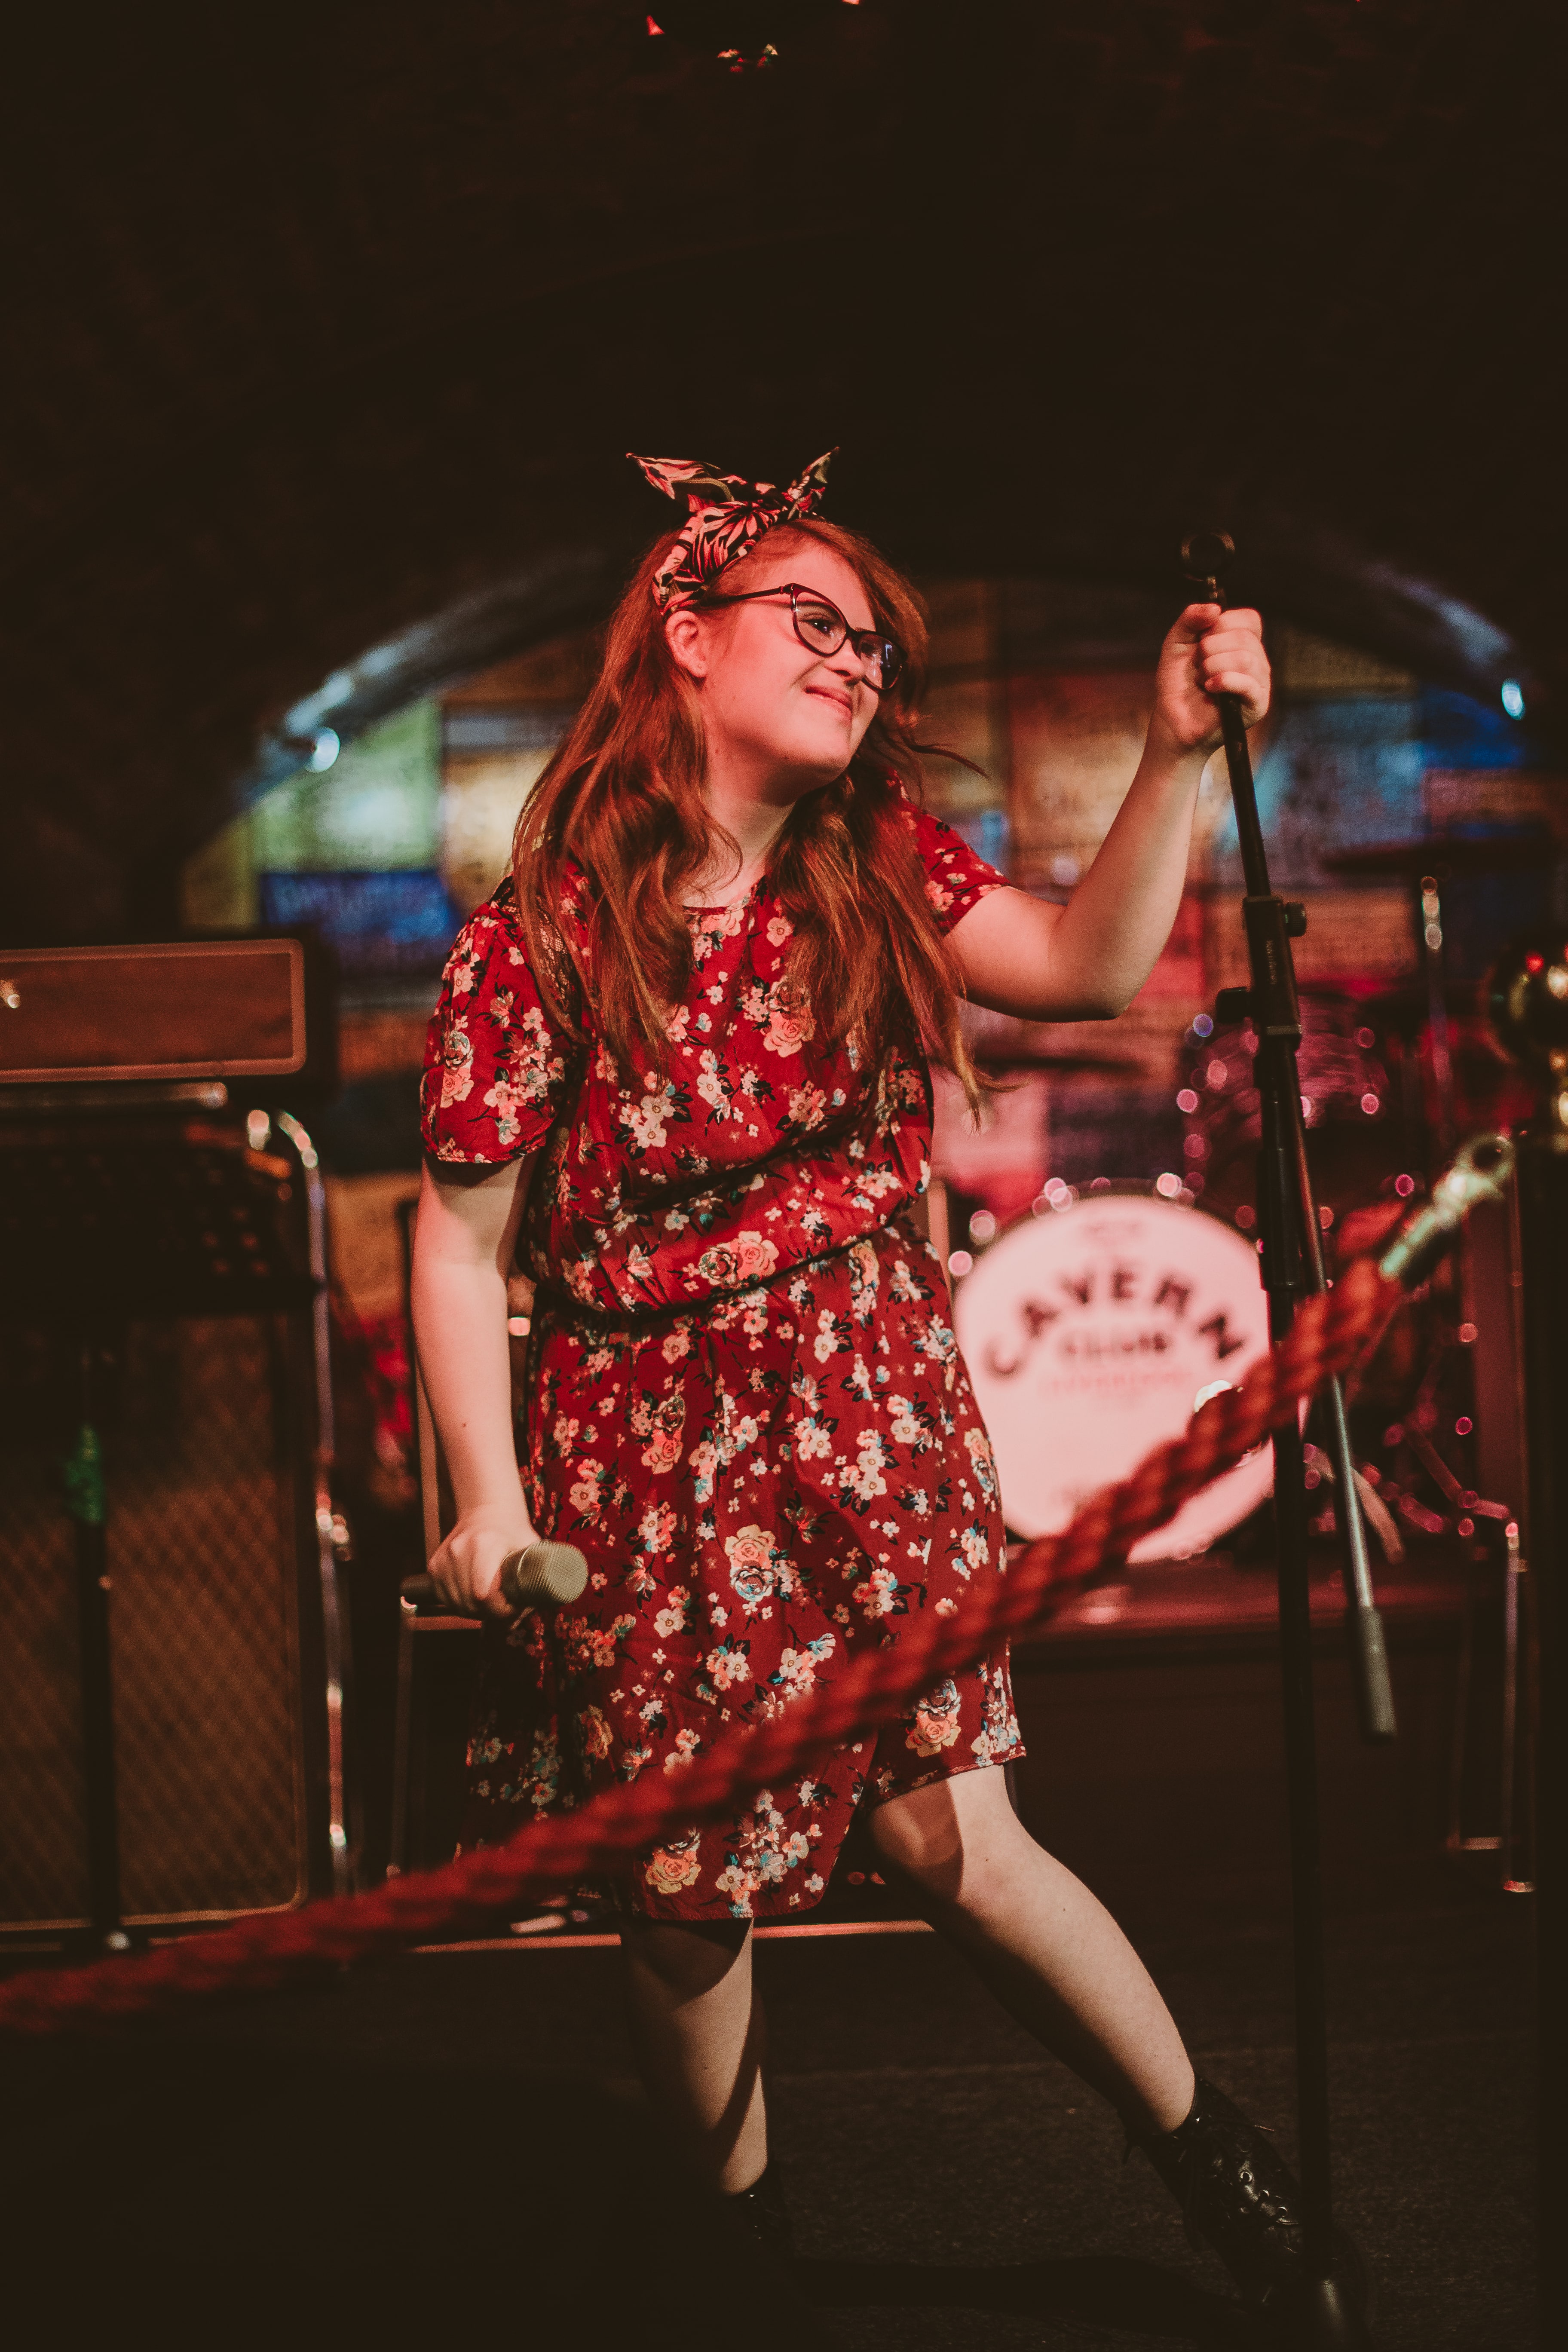 Girl in a dress holding a mic on stage